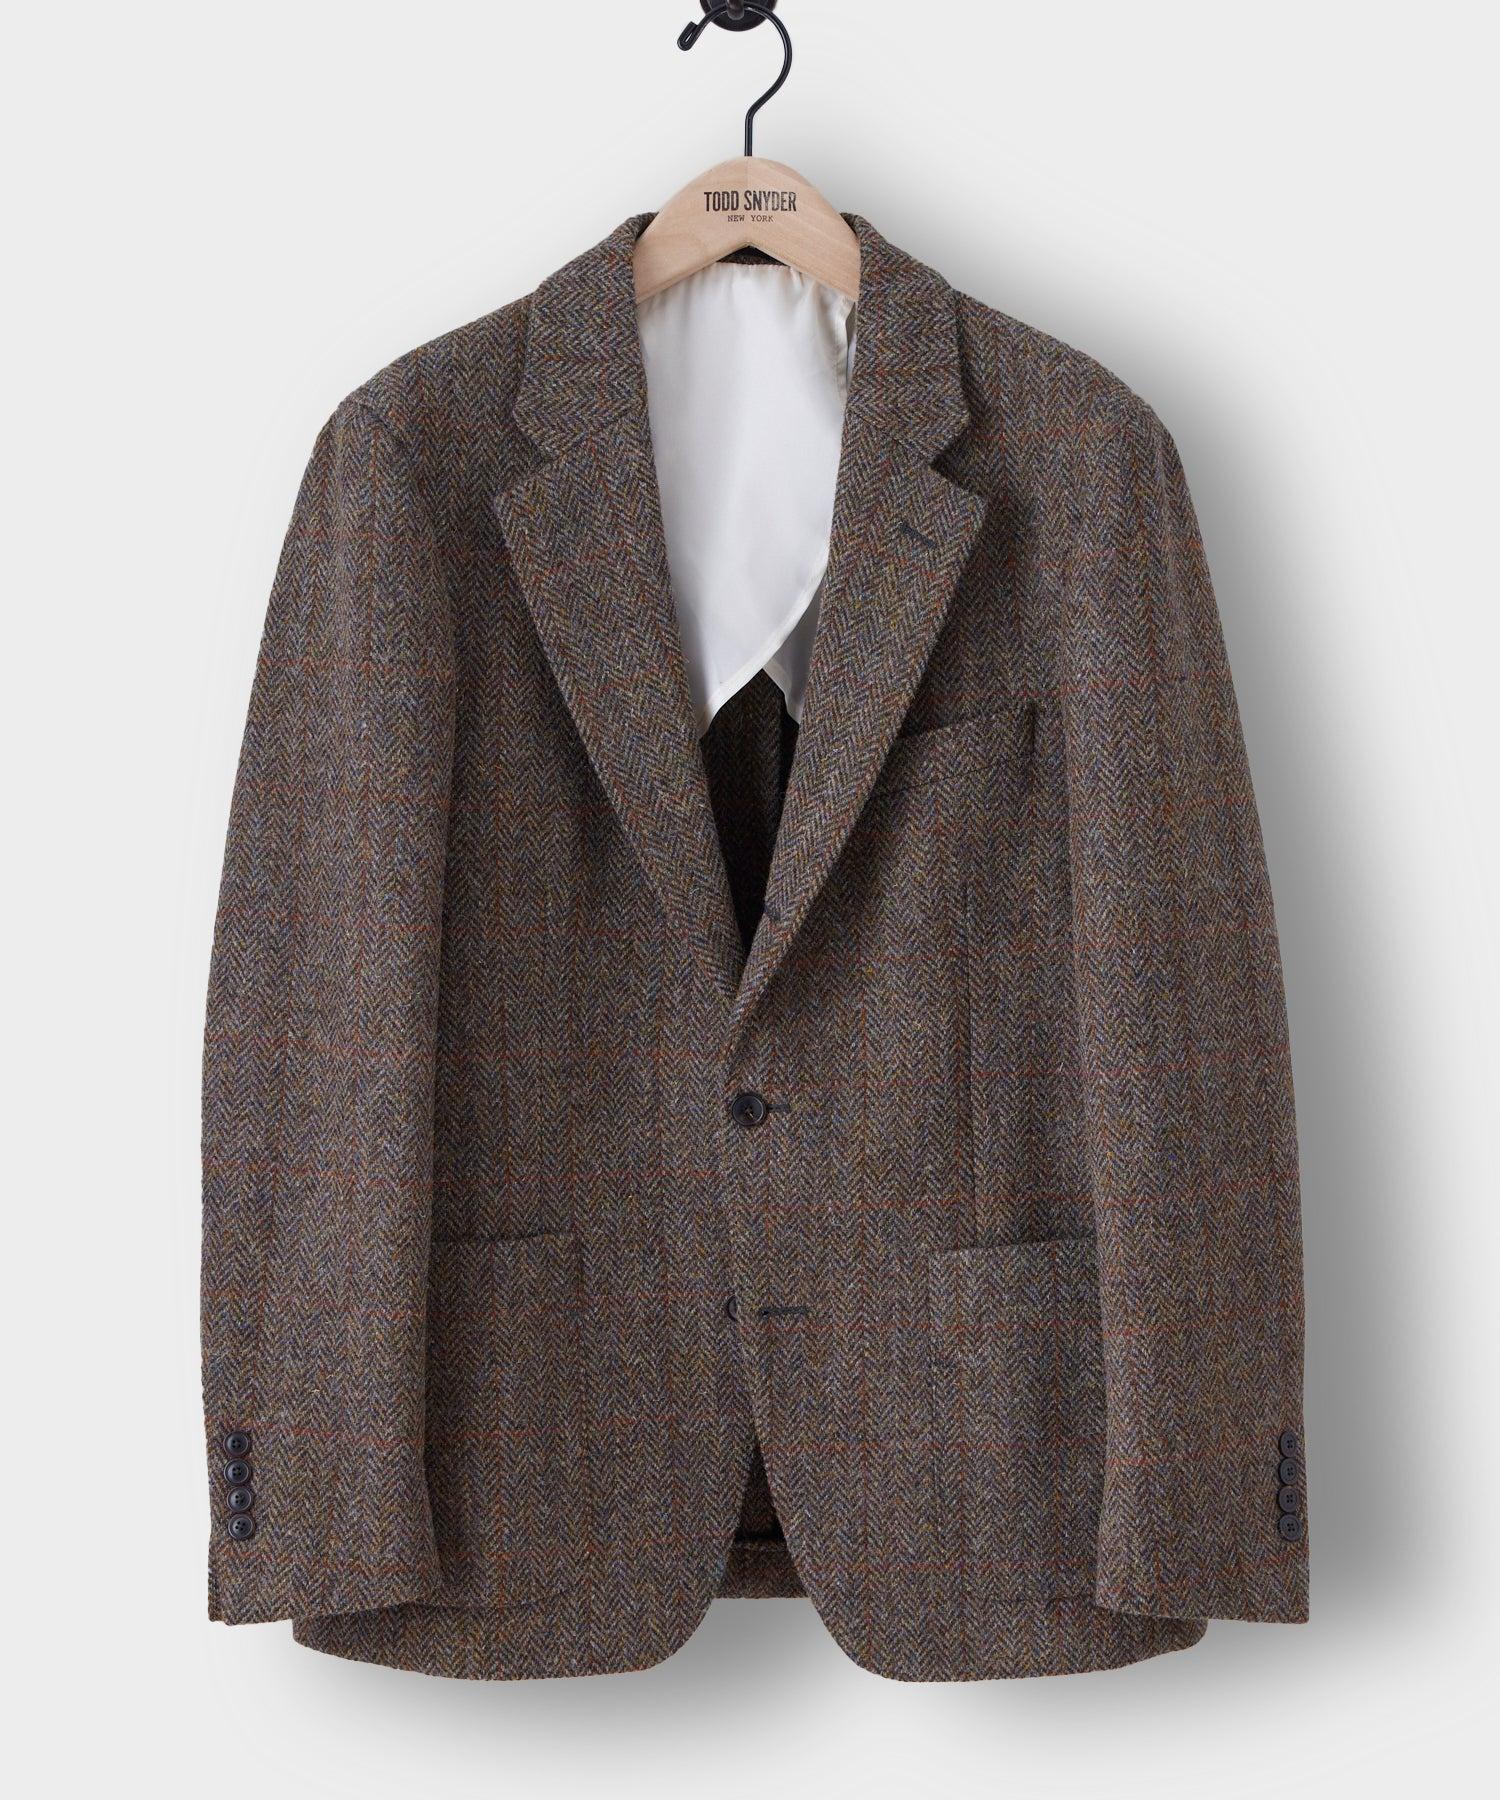 Todd Snyder Relaxed Herringbone Wythe Suit Jacket in Brown for Men | Lyst